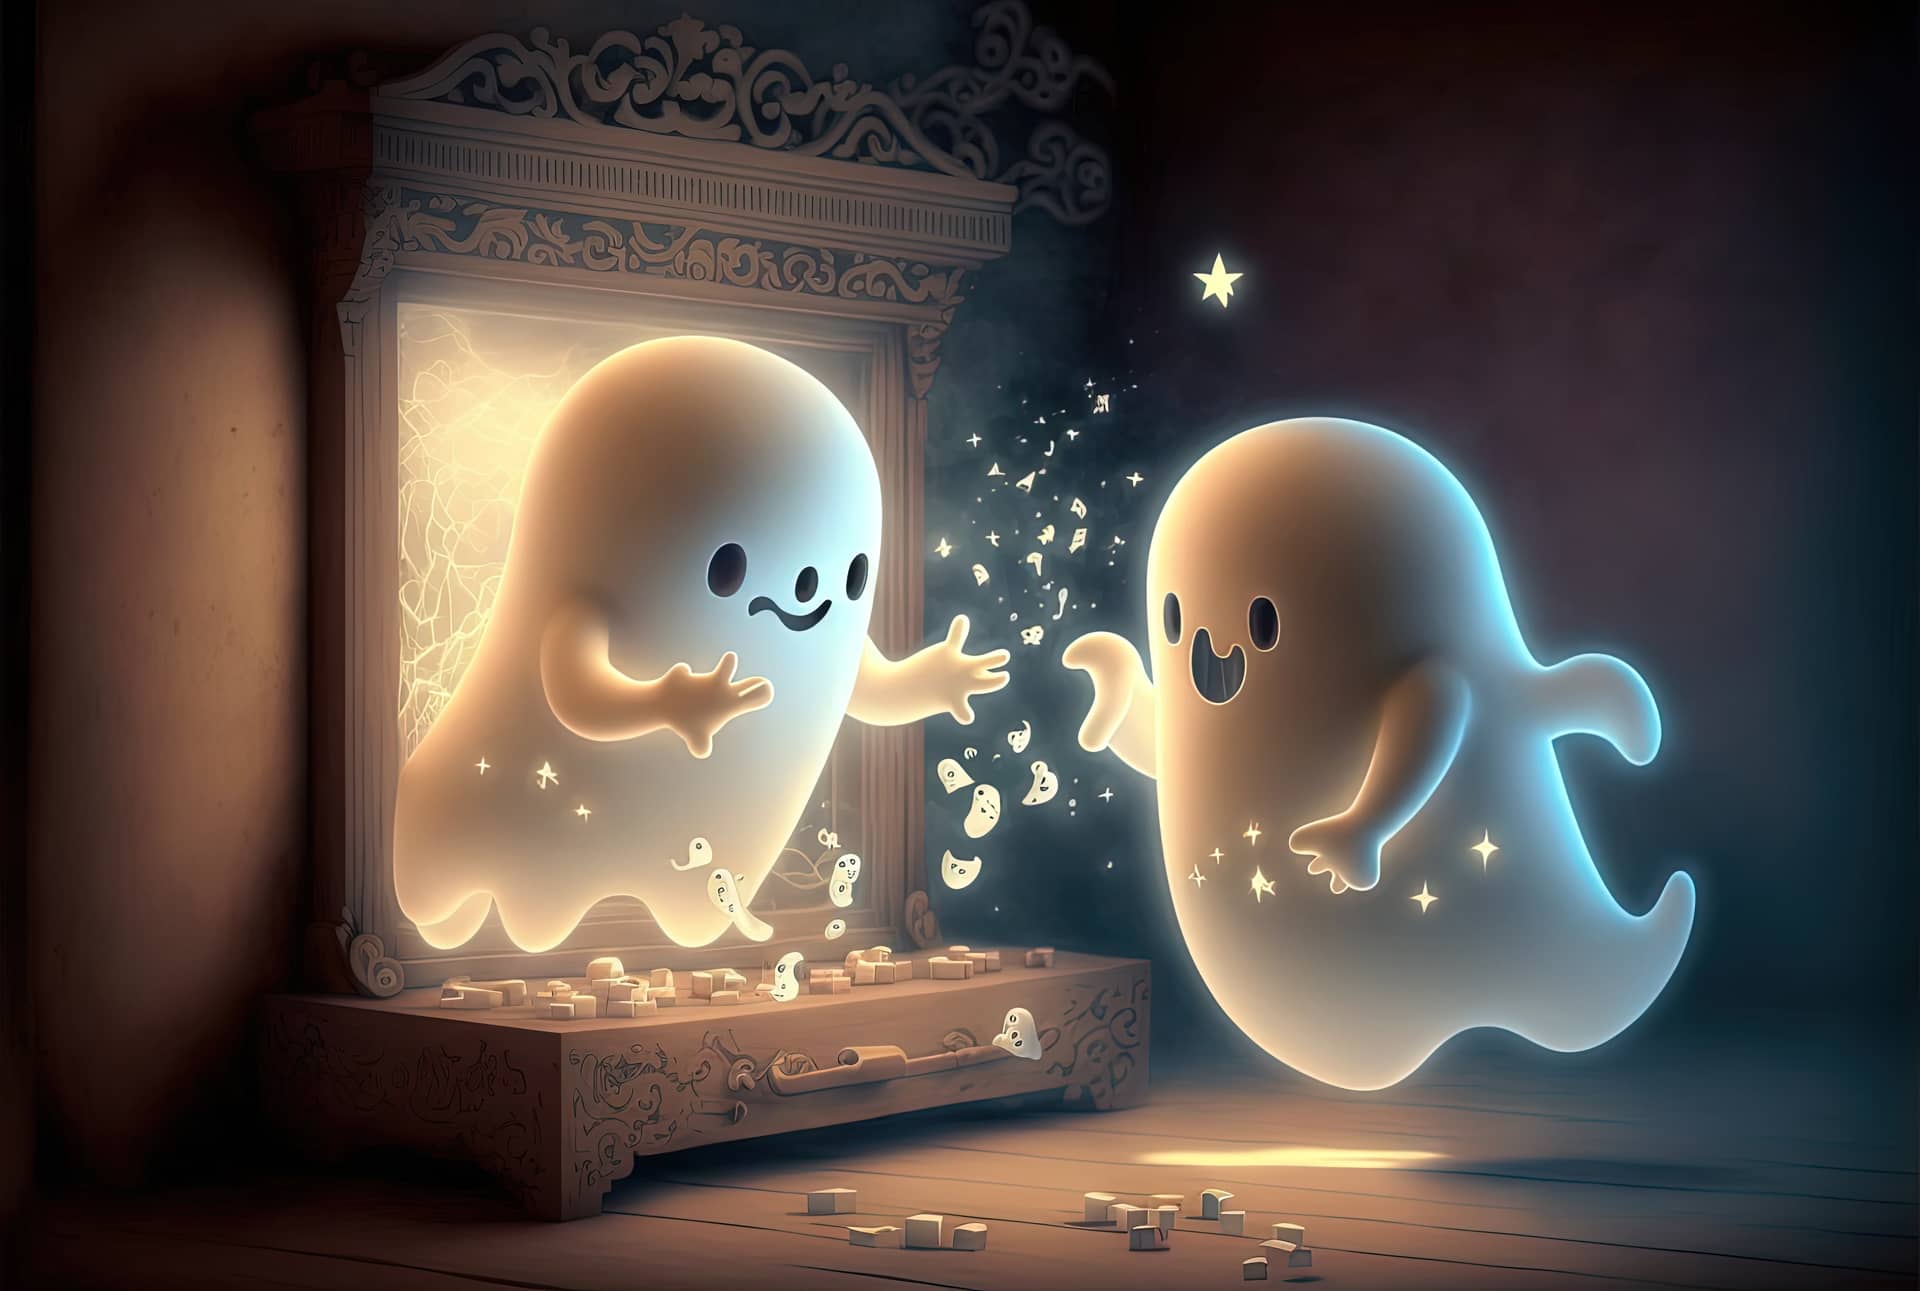 Cute so scary ghost playing having fun generative captivating image